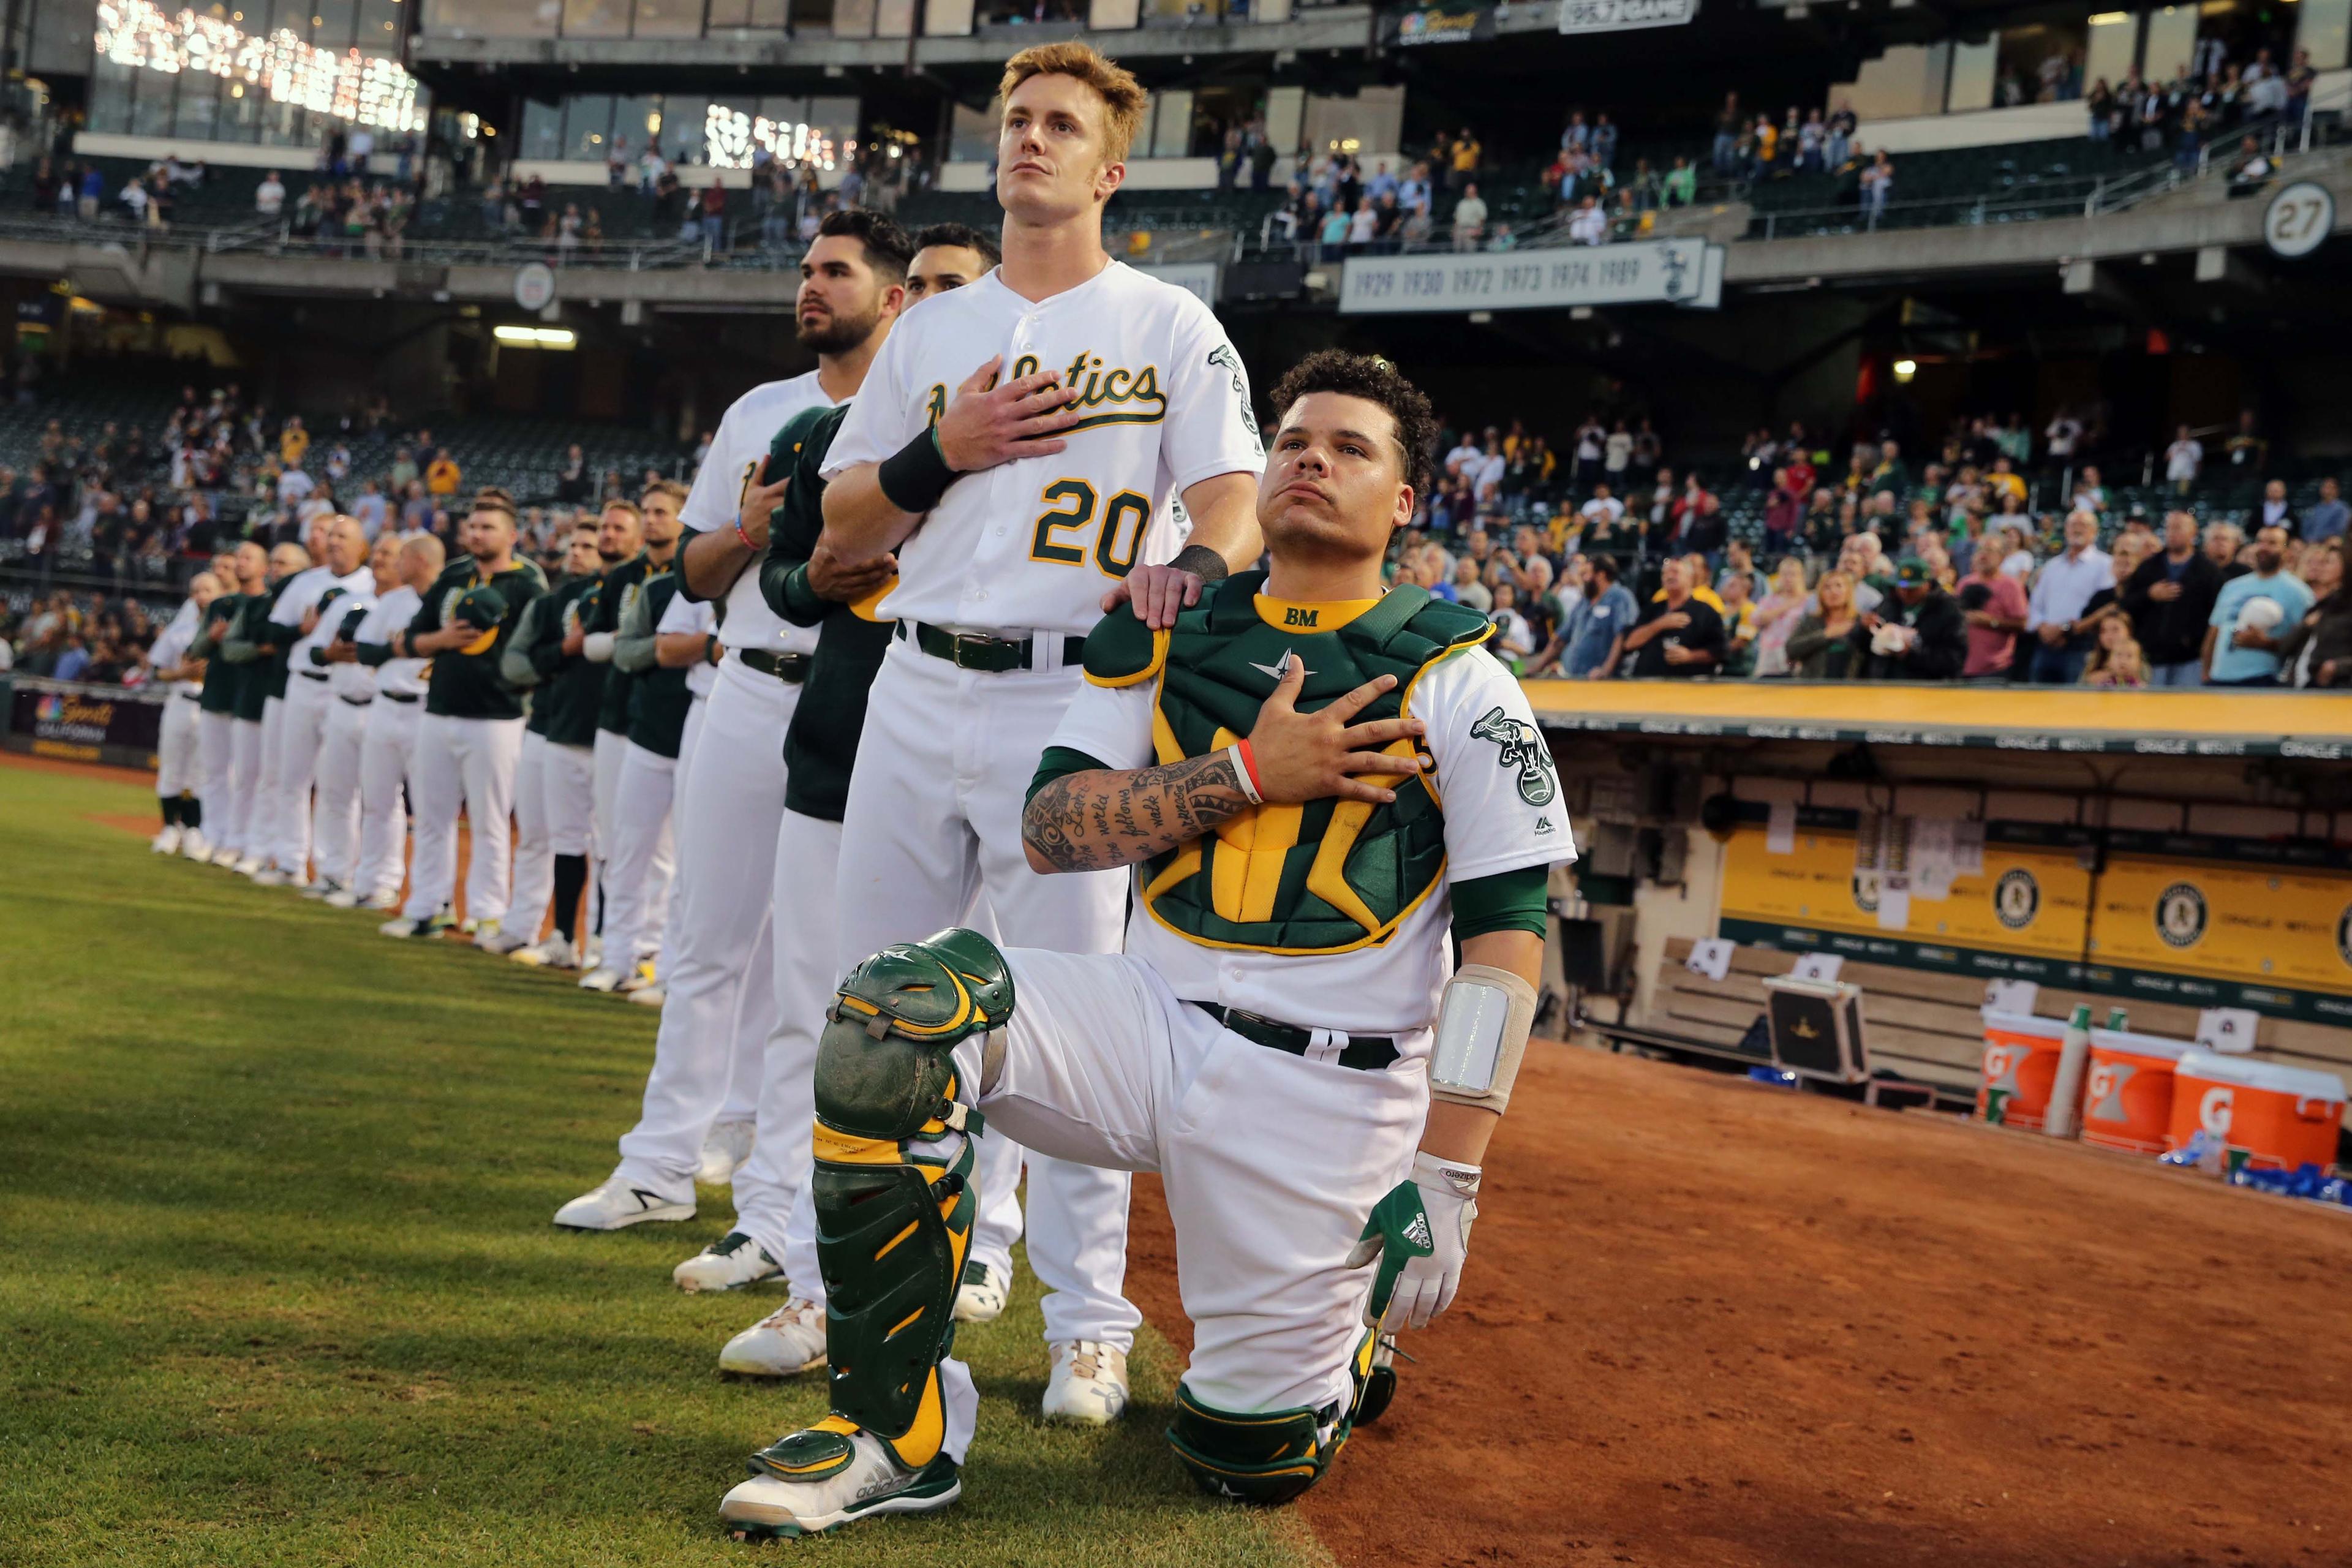 Bruce Maxwell kneels during the national anthem before a game with the Oakland A's / USA TODAY